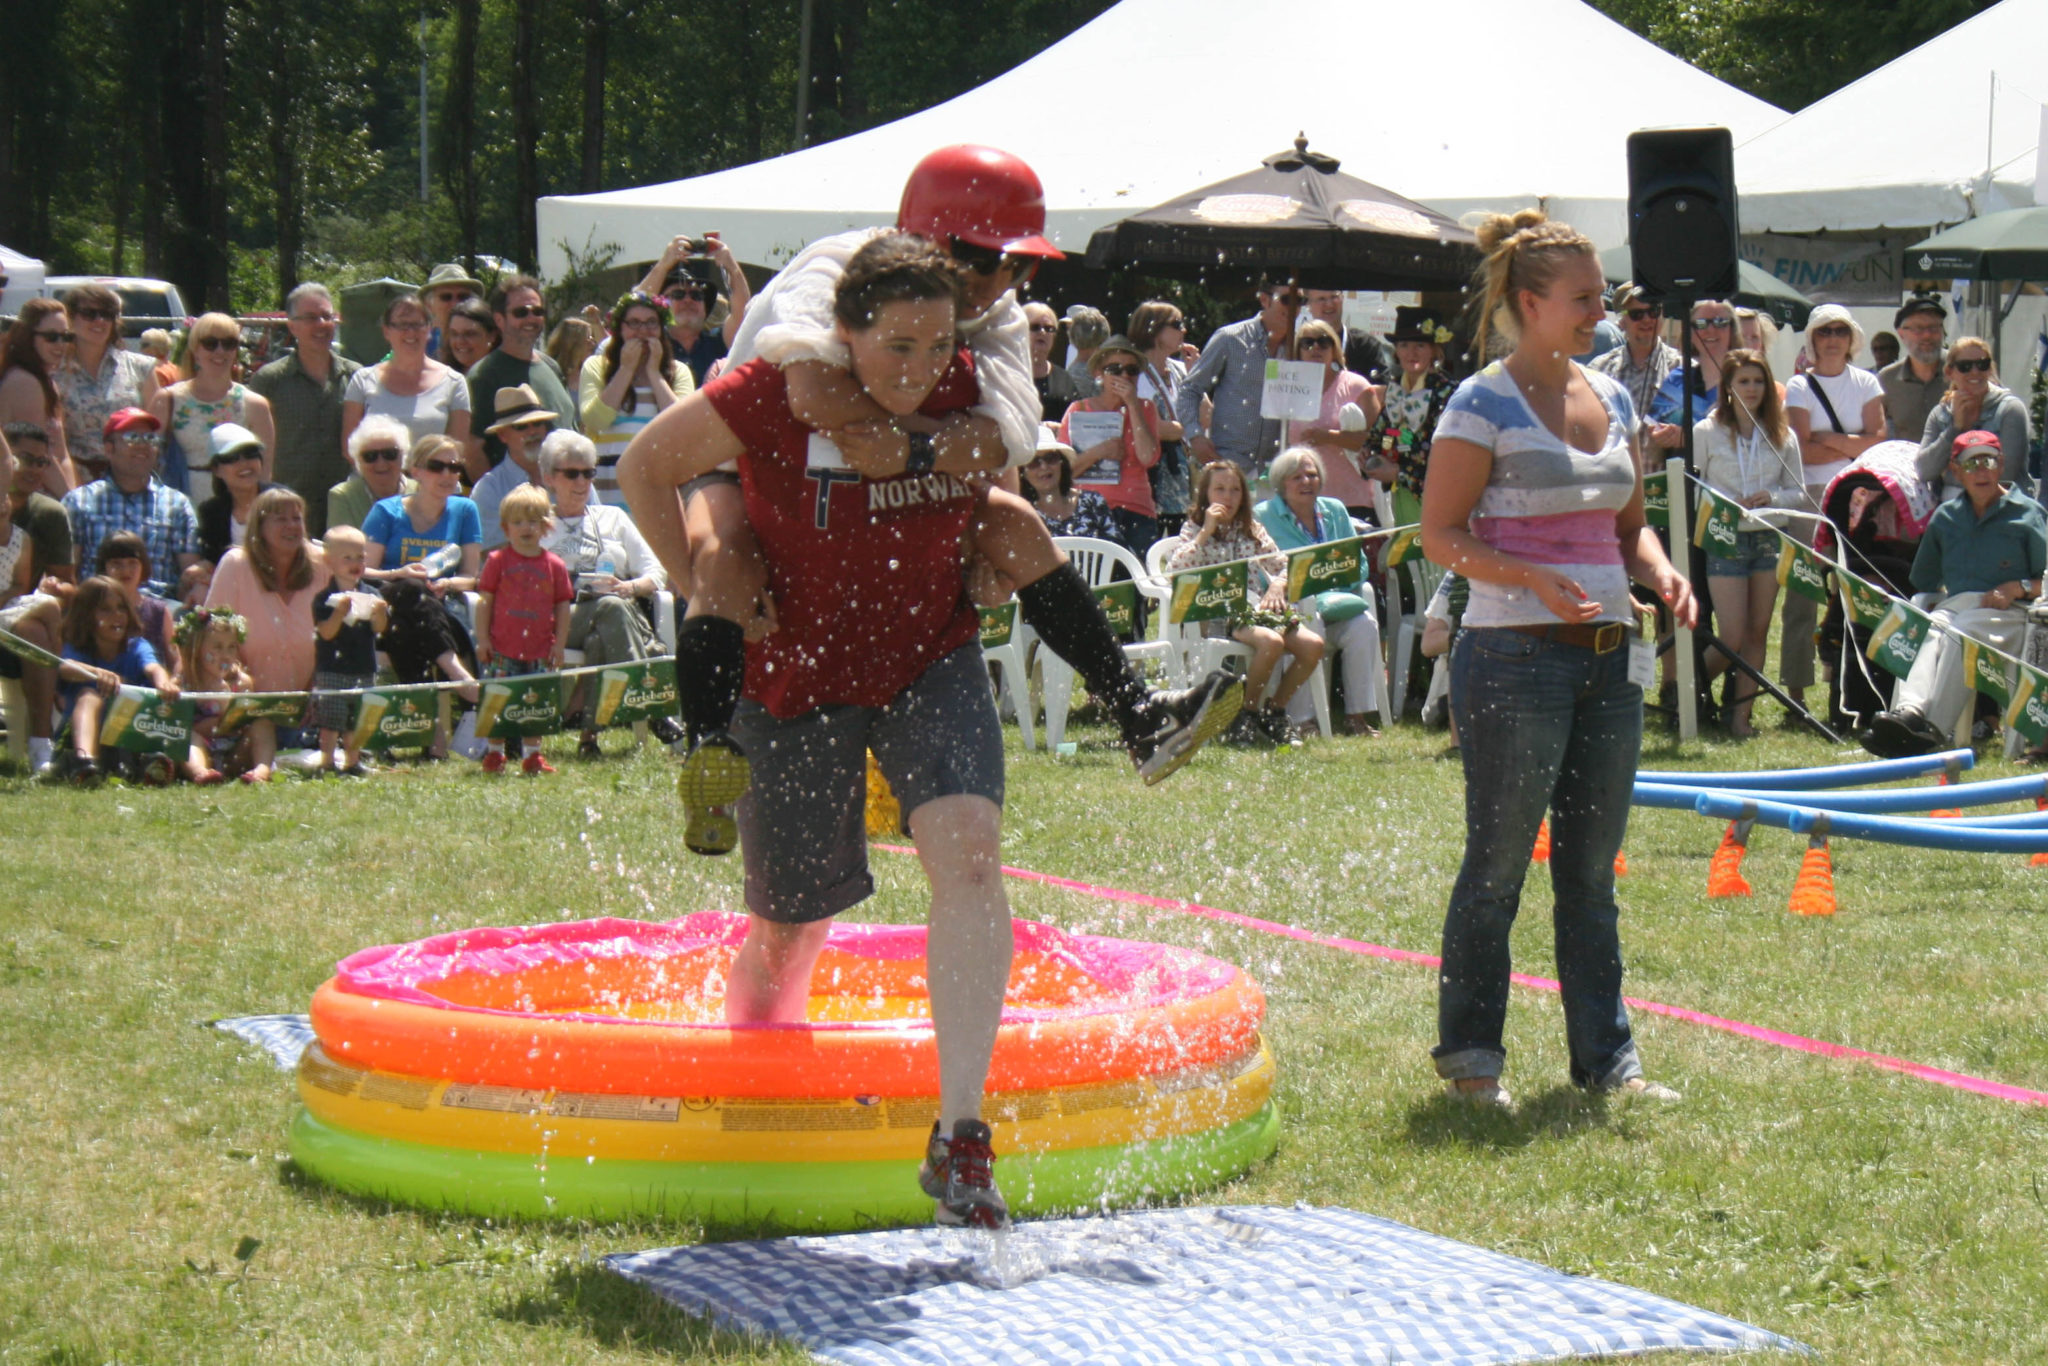 Wife Carrying Contest Registration now open!